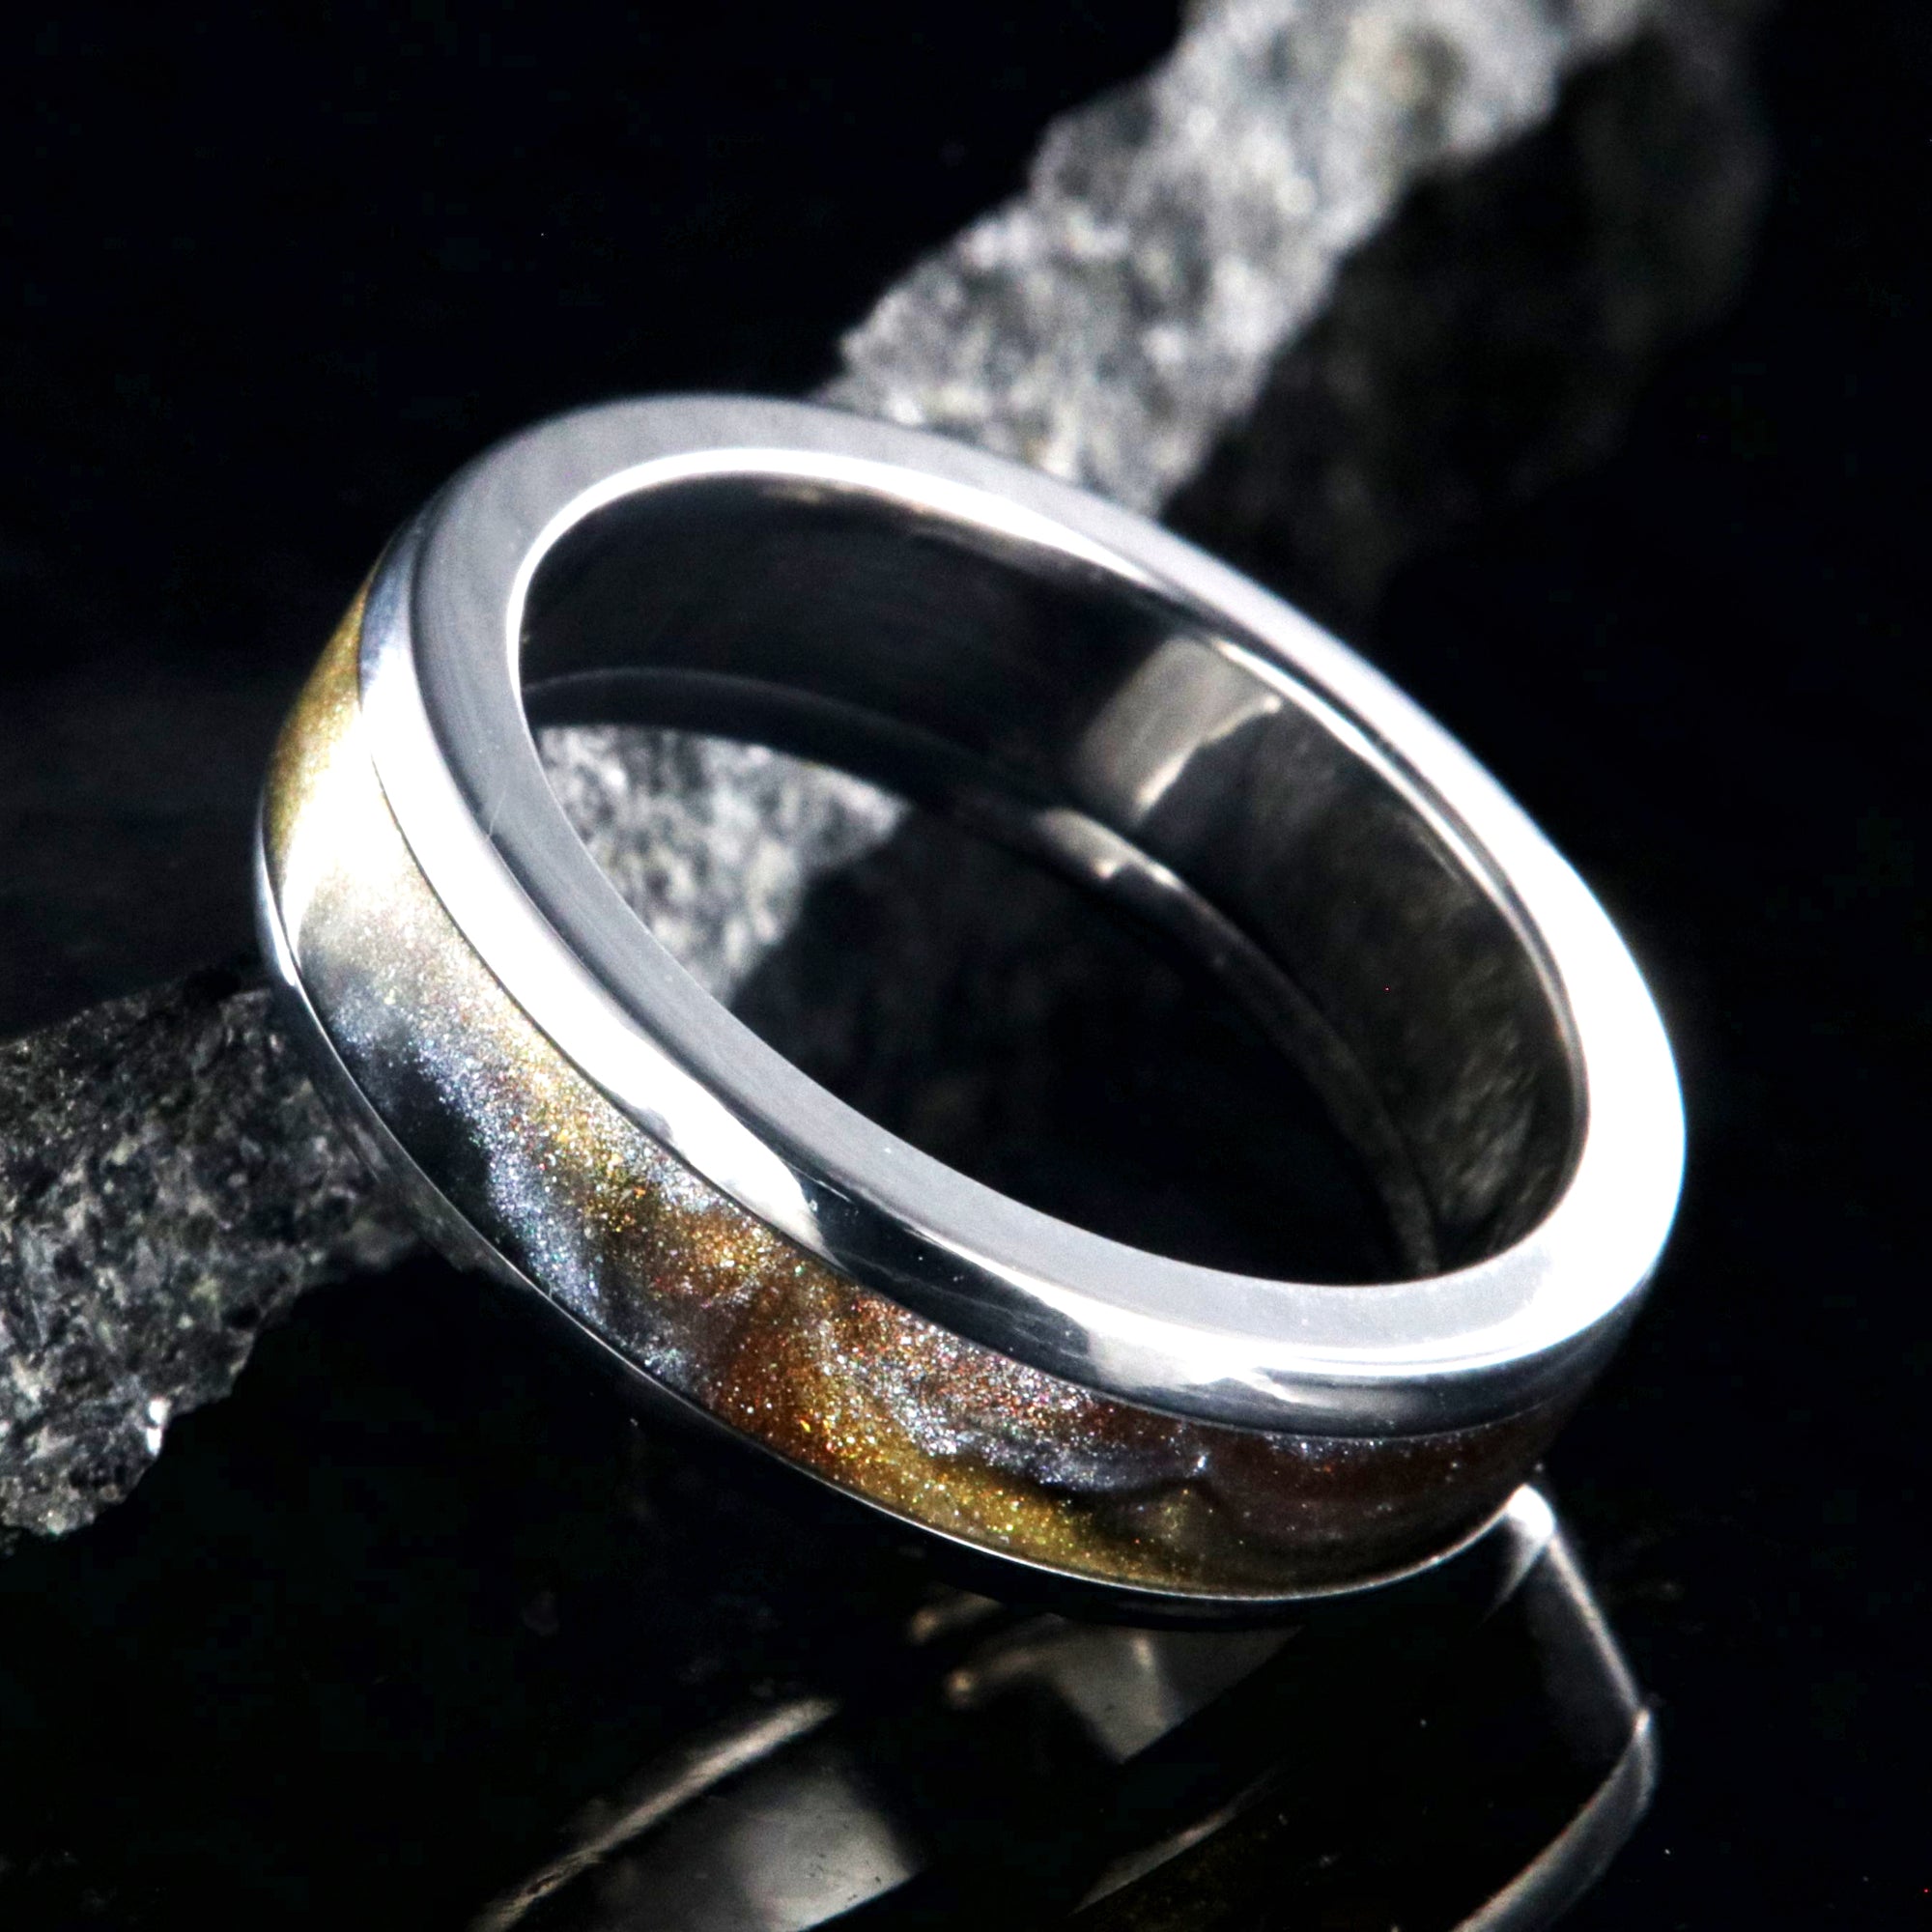 6mm wide titanium ring with a gold, black, and silver inlay